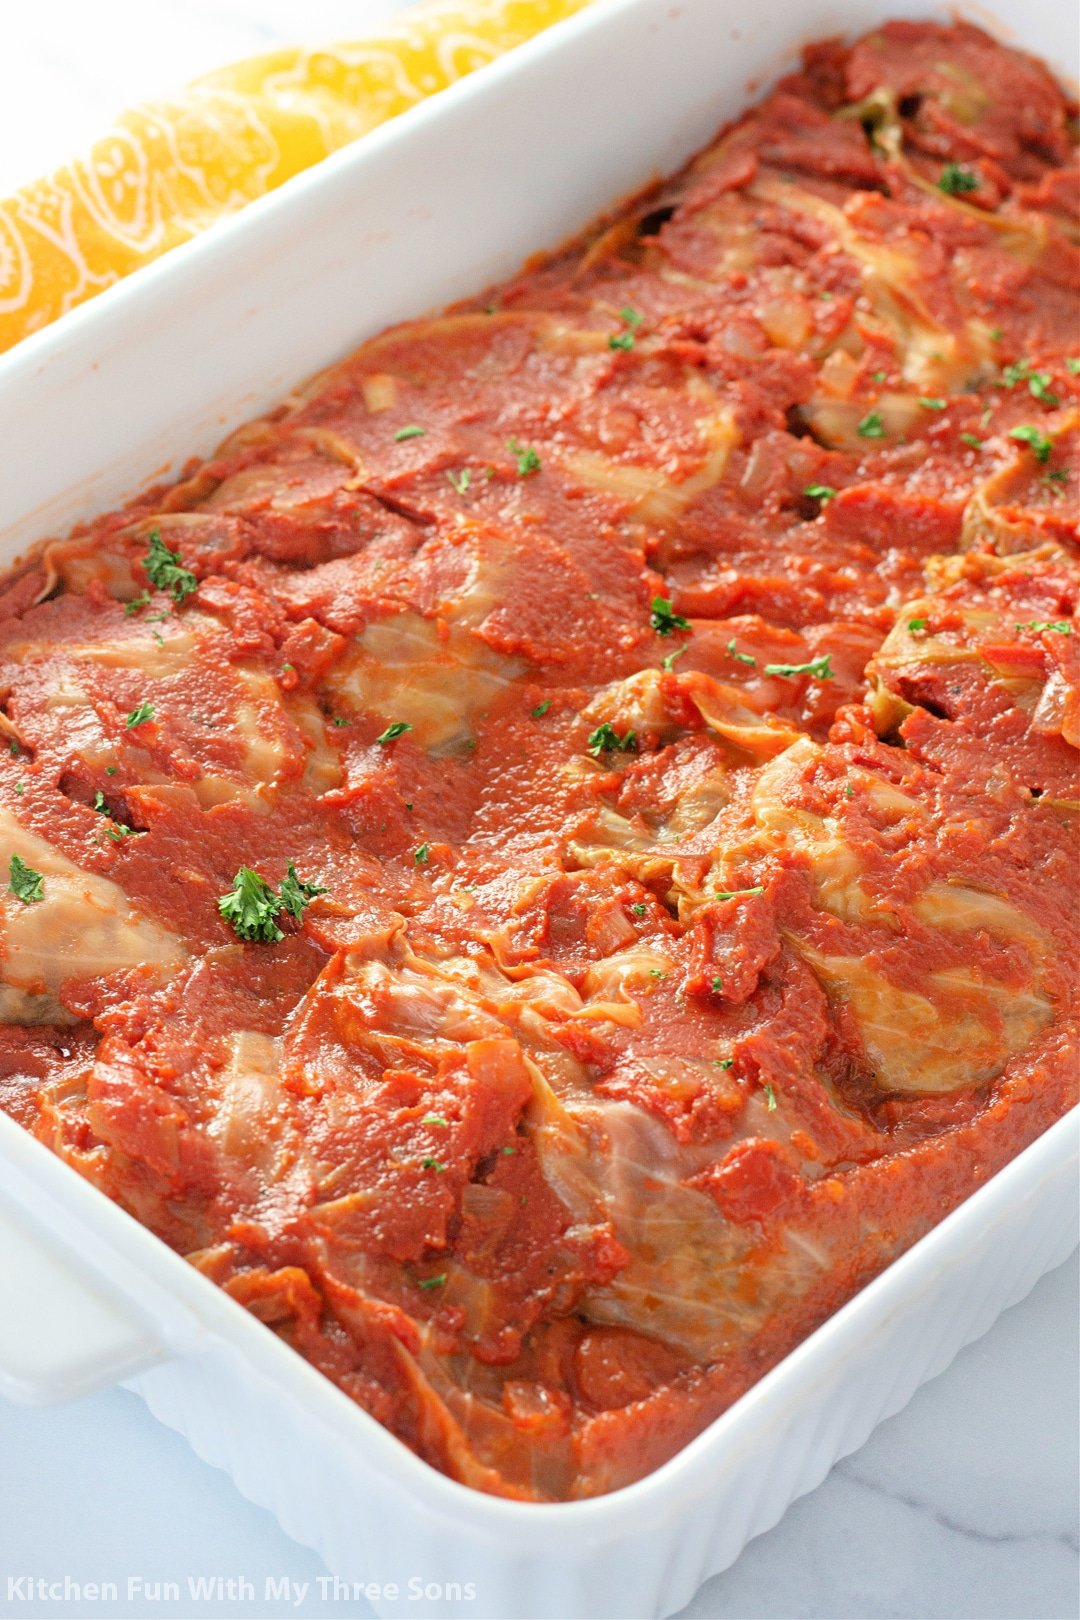 Overhead view of cabbage rolls in a baking dish